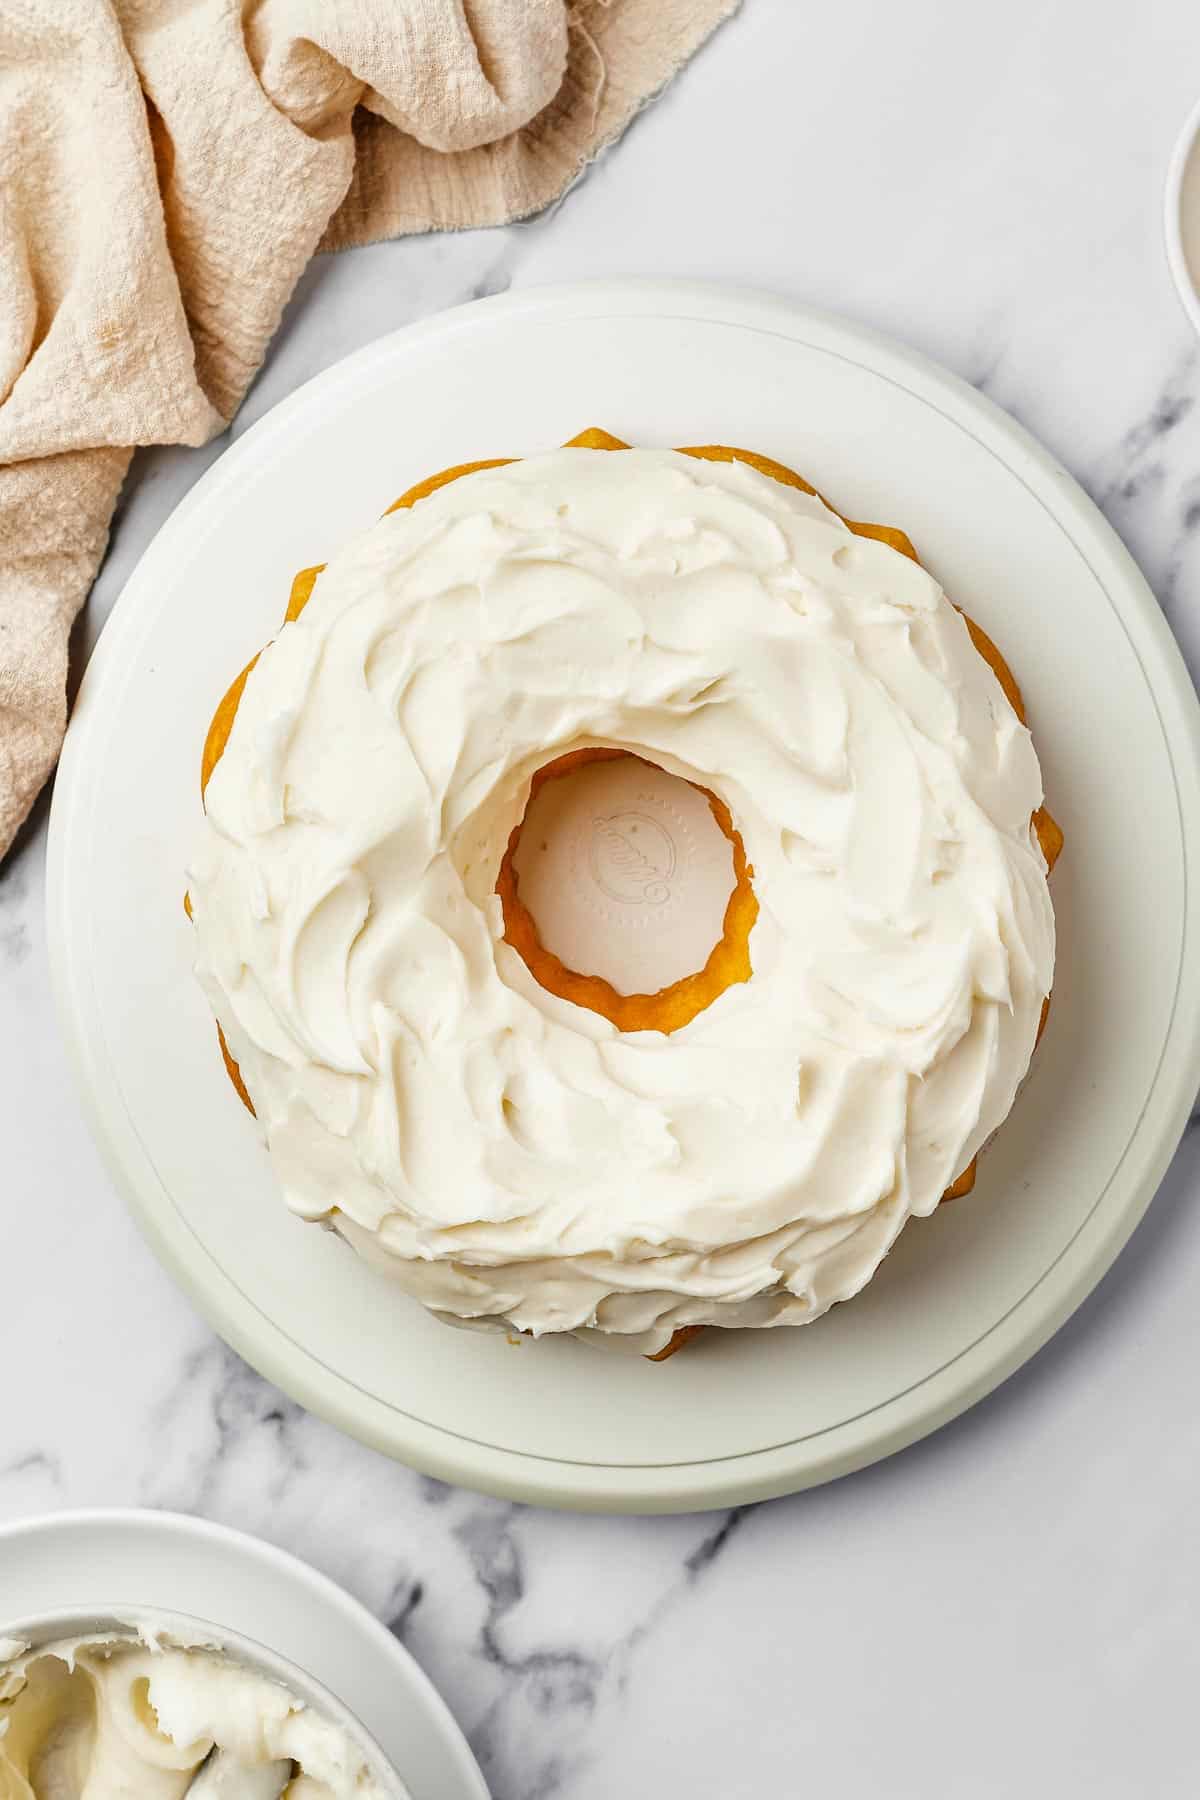 Overhead shot of a bundt cake iced with thick, creamy frosting. A bowl of frosting and dish of lemon zest are nearby on the table.